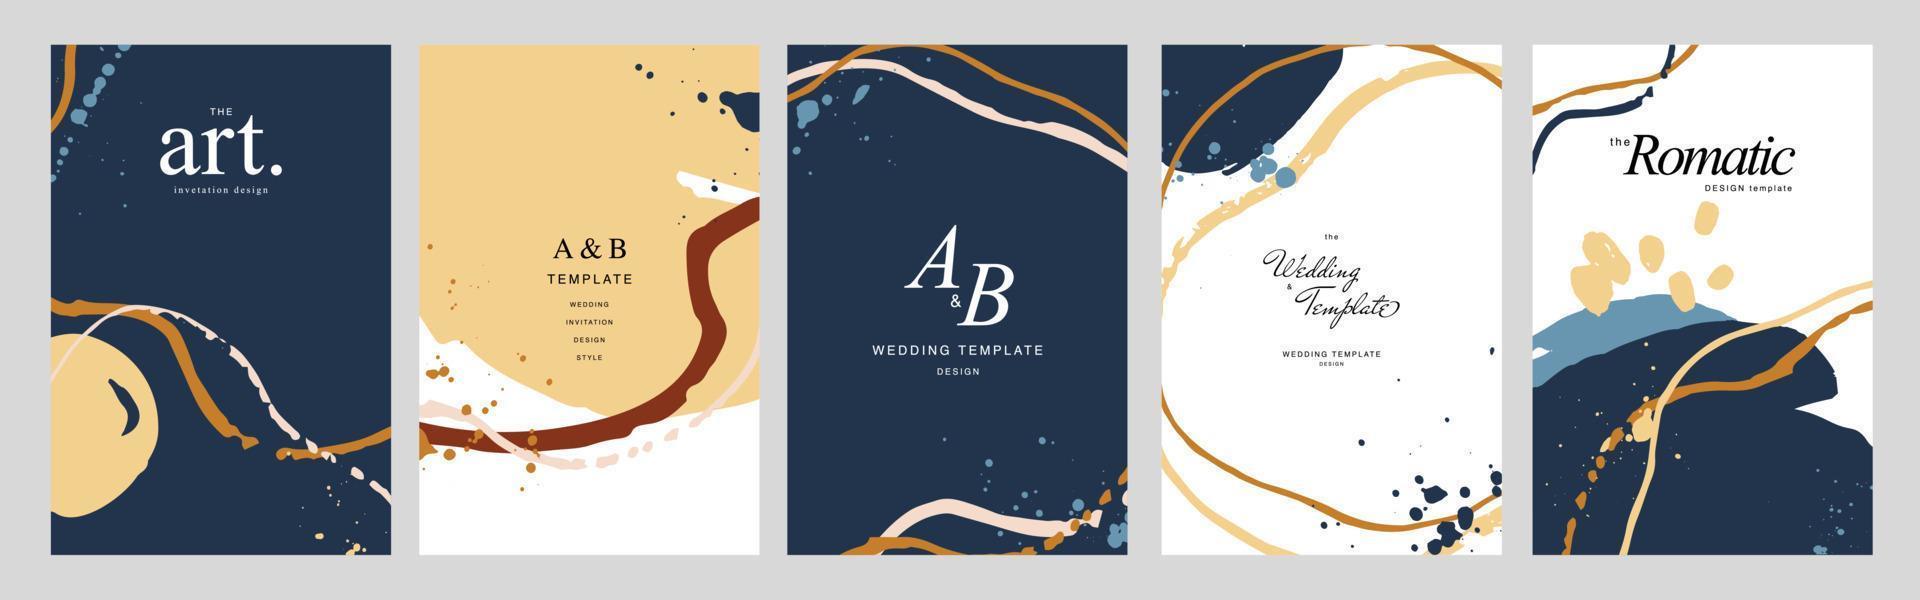 Set of minimalist design for portrait wedding invitation templates. Simple brush stroke backgrounds in vintage themes for greeting cards. Collection of premium and elegance design graphic vector